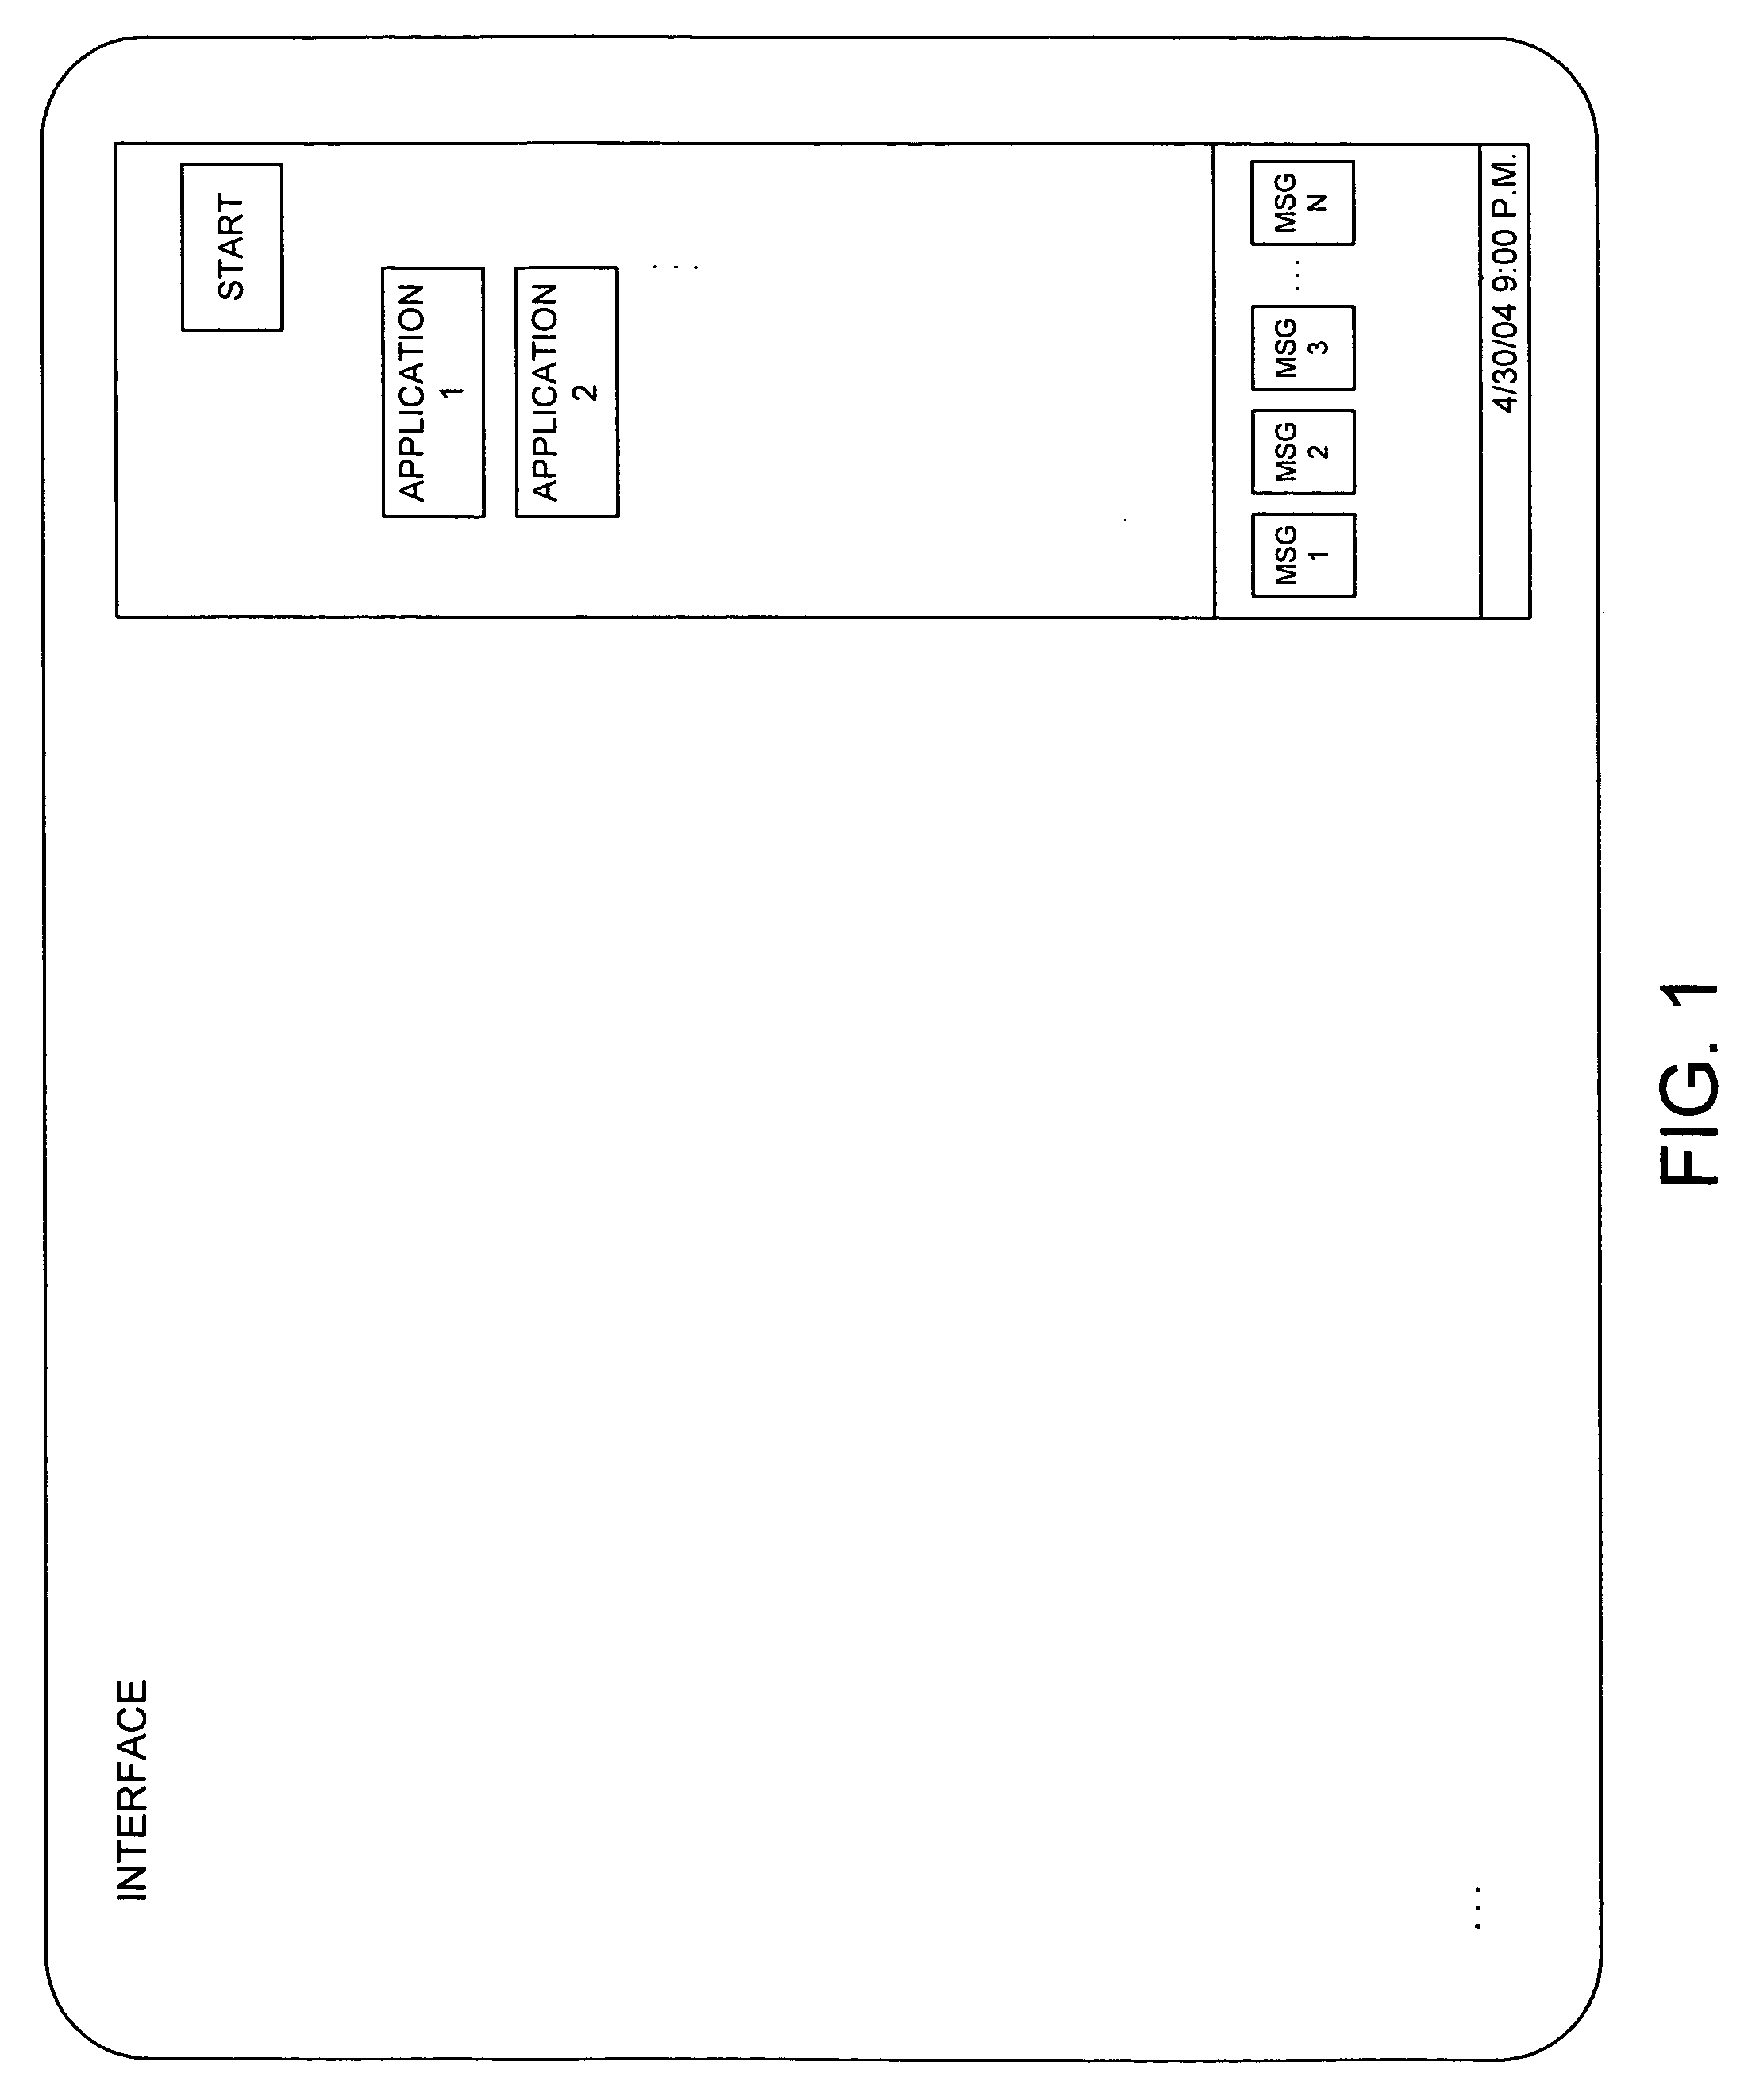 System and method for generating message notification objects on dynamically scaled timeline